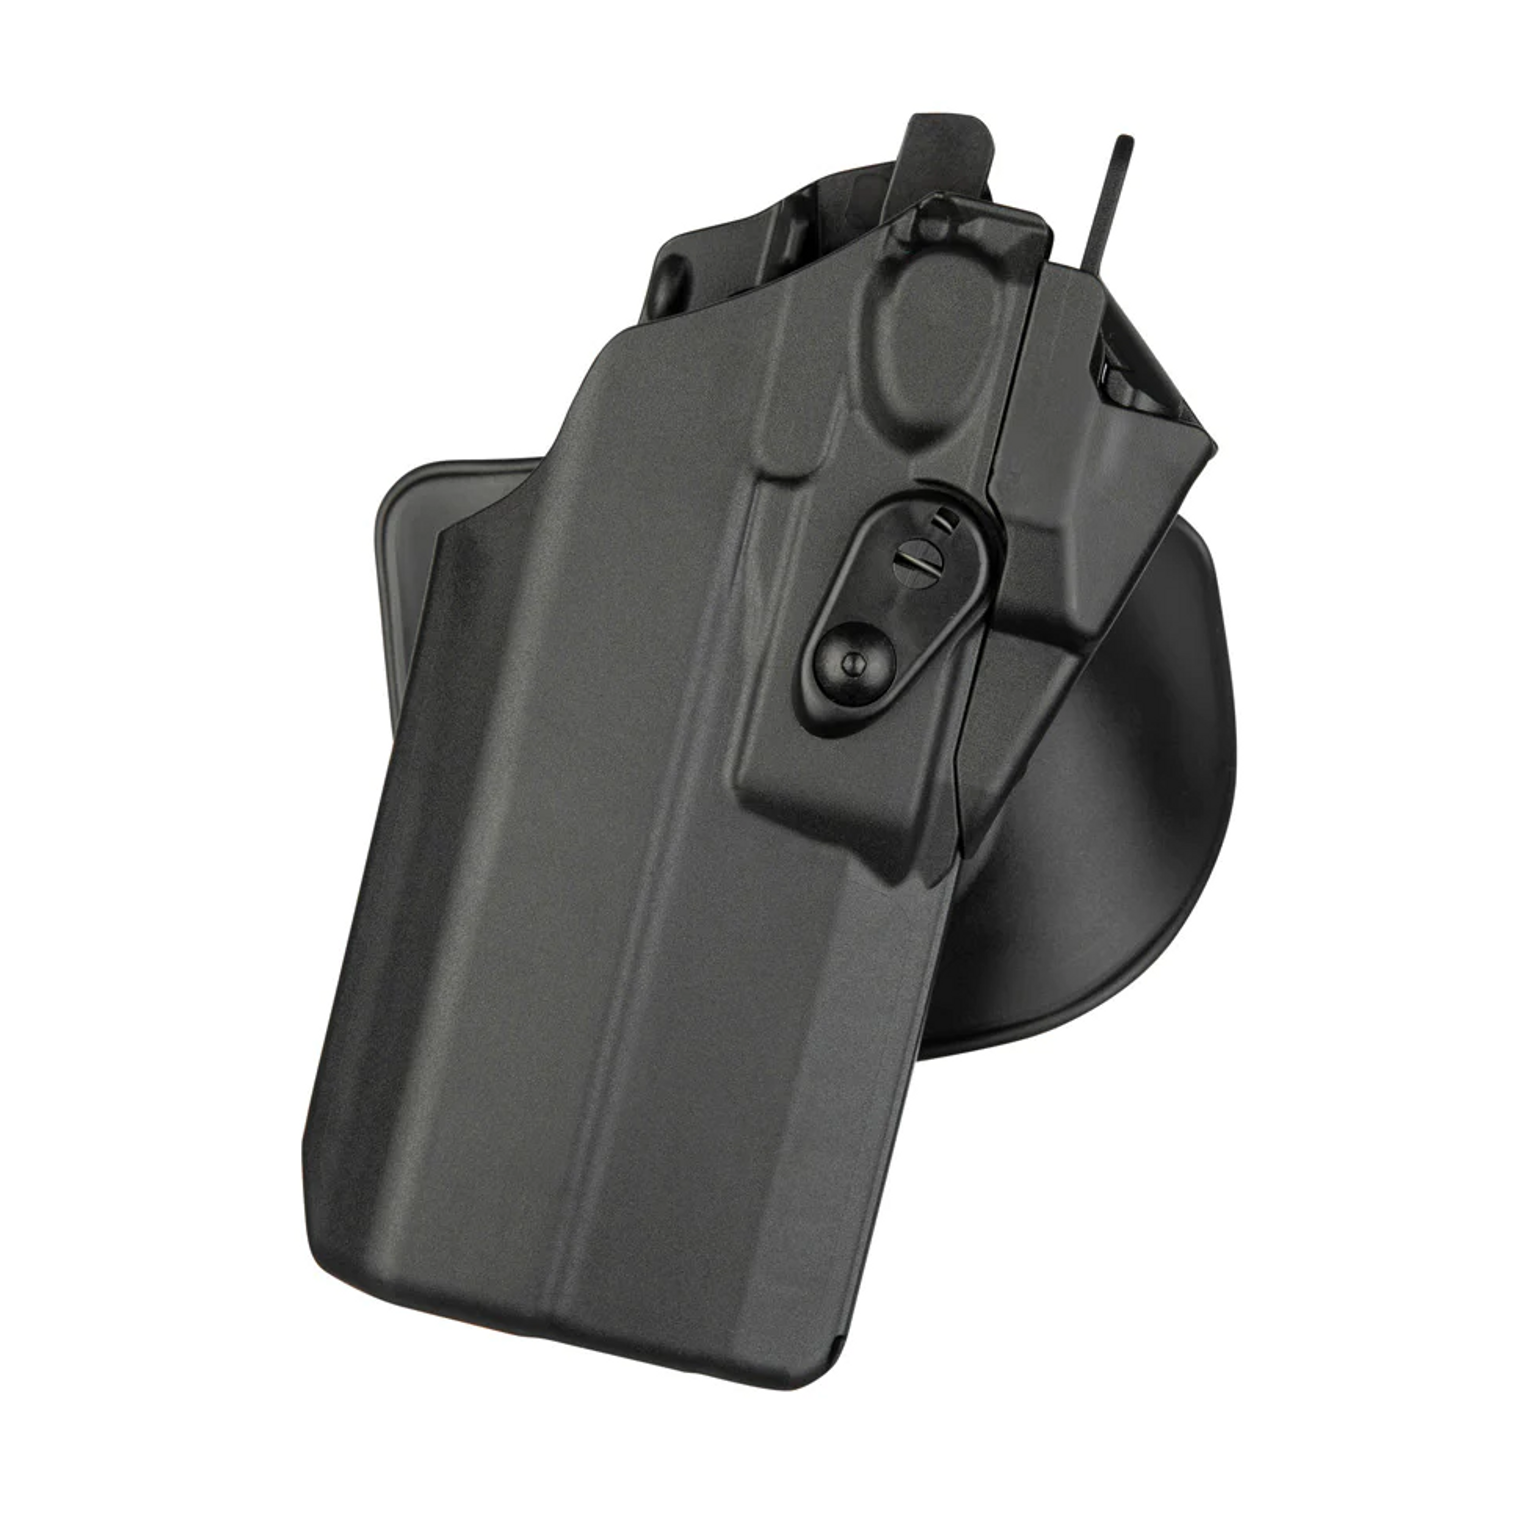 Model 7378rds 7ts Als Concealment Paddle & Belt Loop Combo Holster For Glock 19 W/ Compact Light